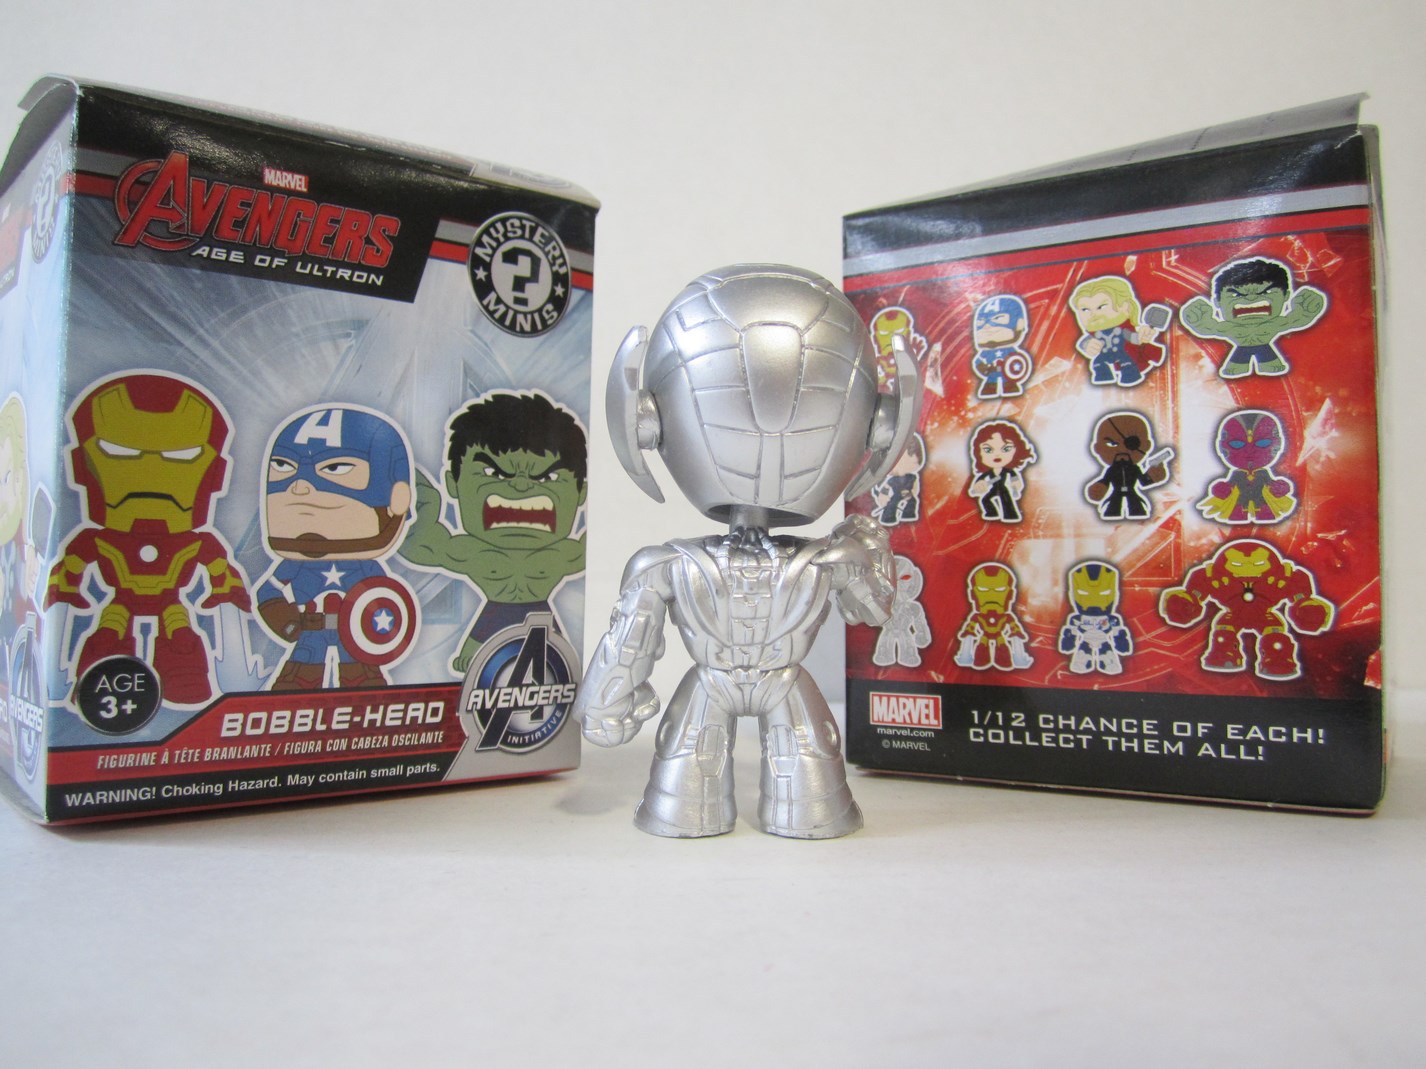 Avengers Age Of Ultron Bobblehead mystery minis Choose Your Mini 